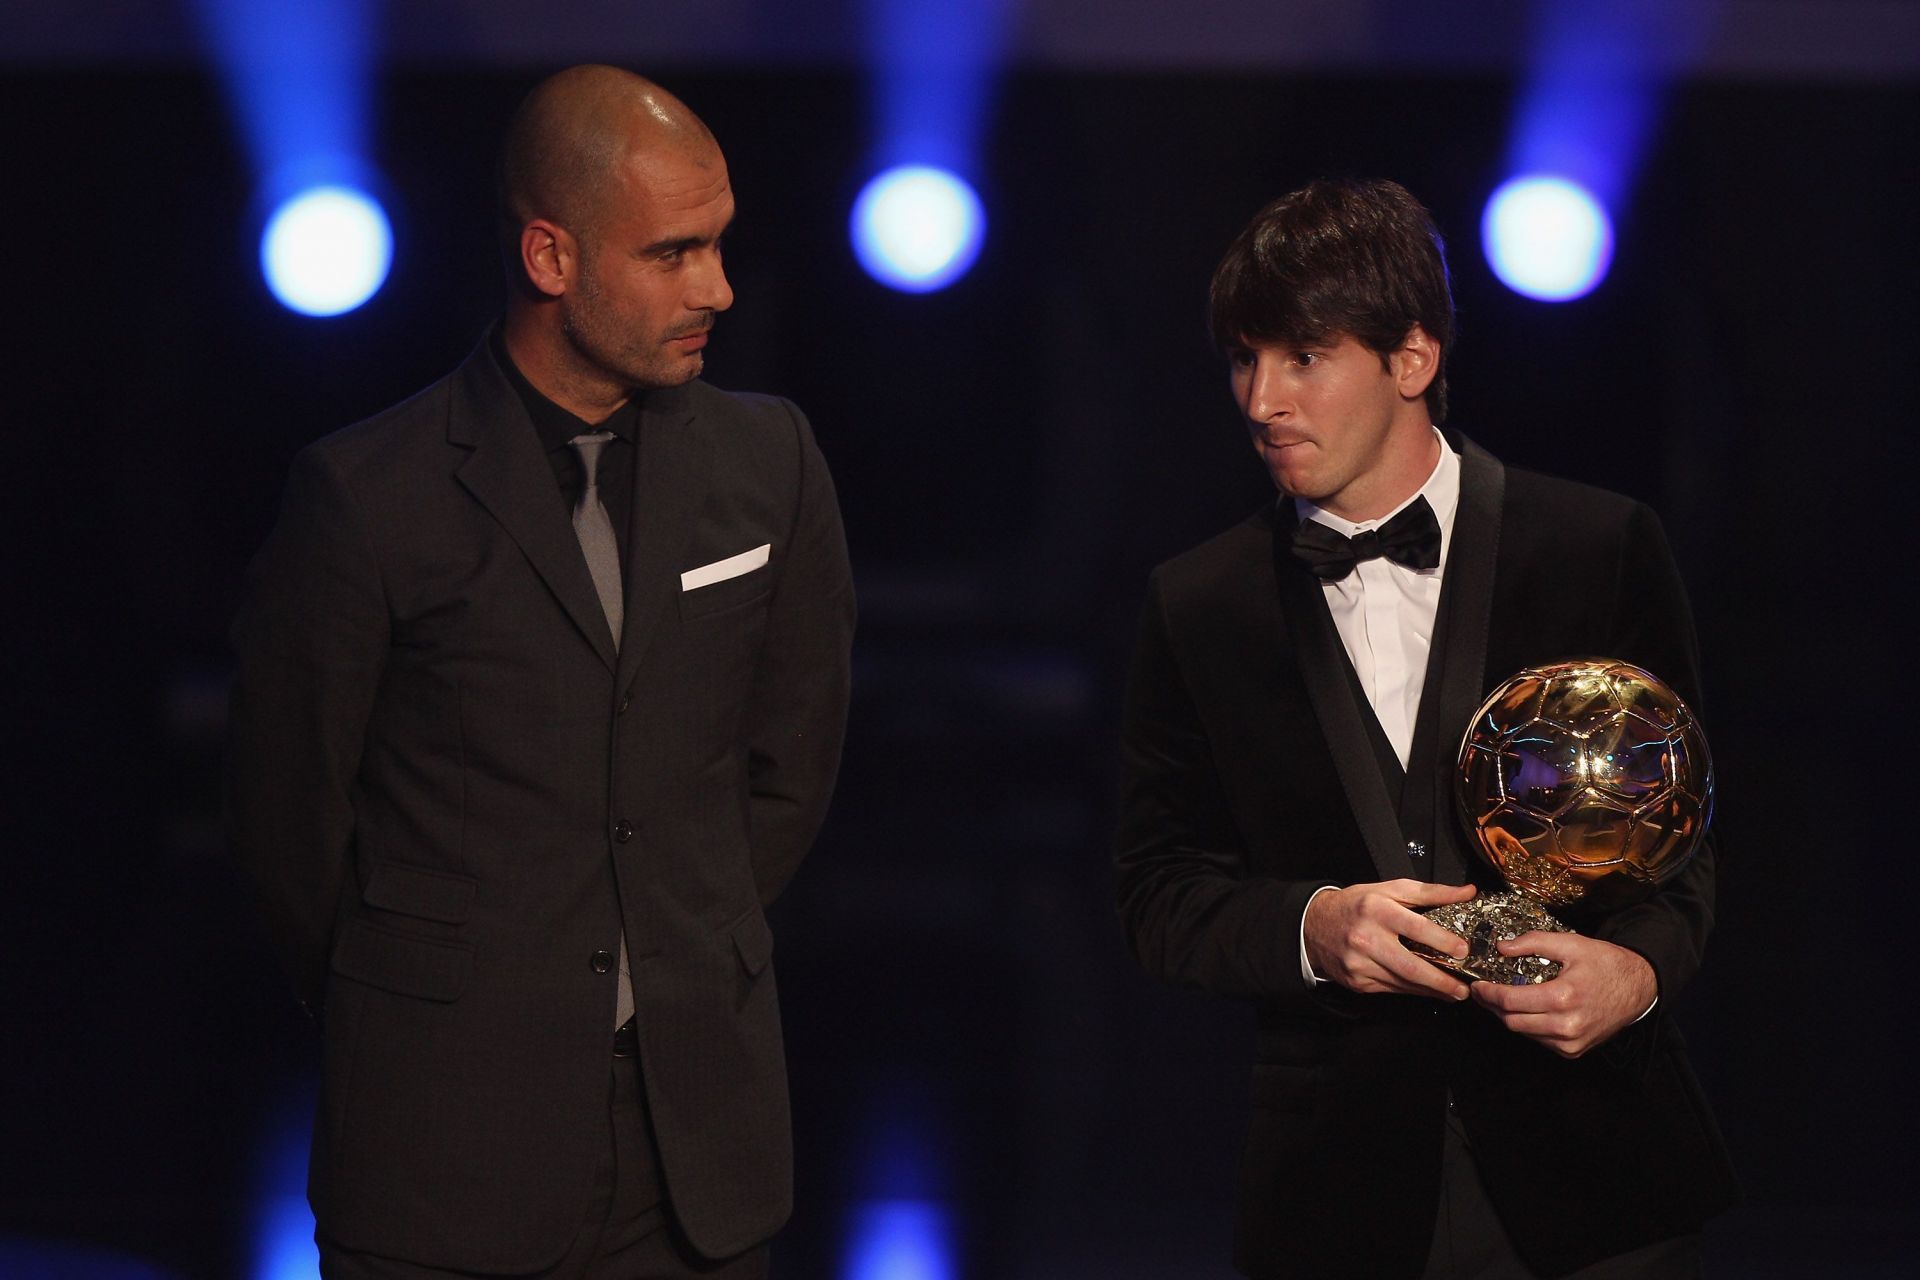 Lionel Messi (right) and Pep Guardiola led Barcelona to a golden era of success.